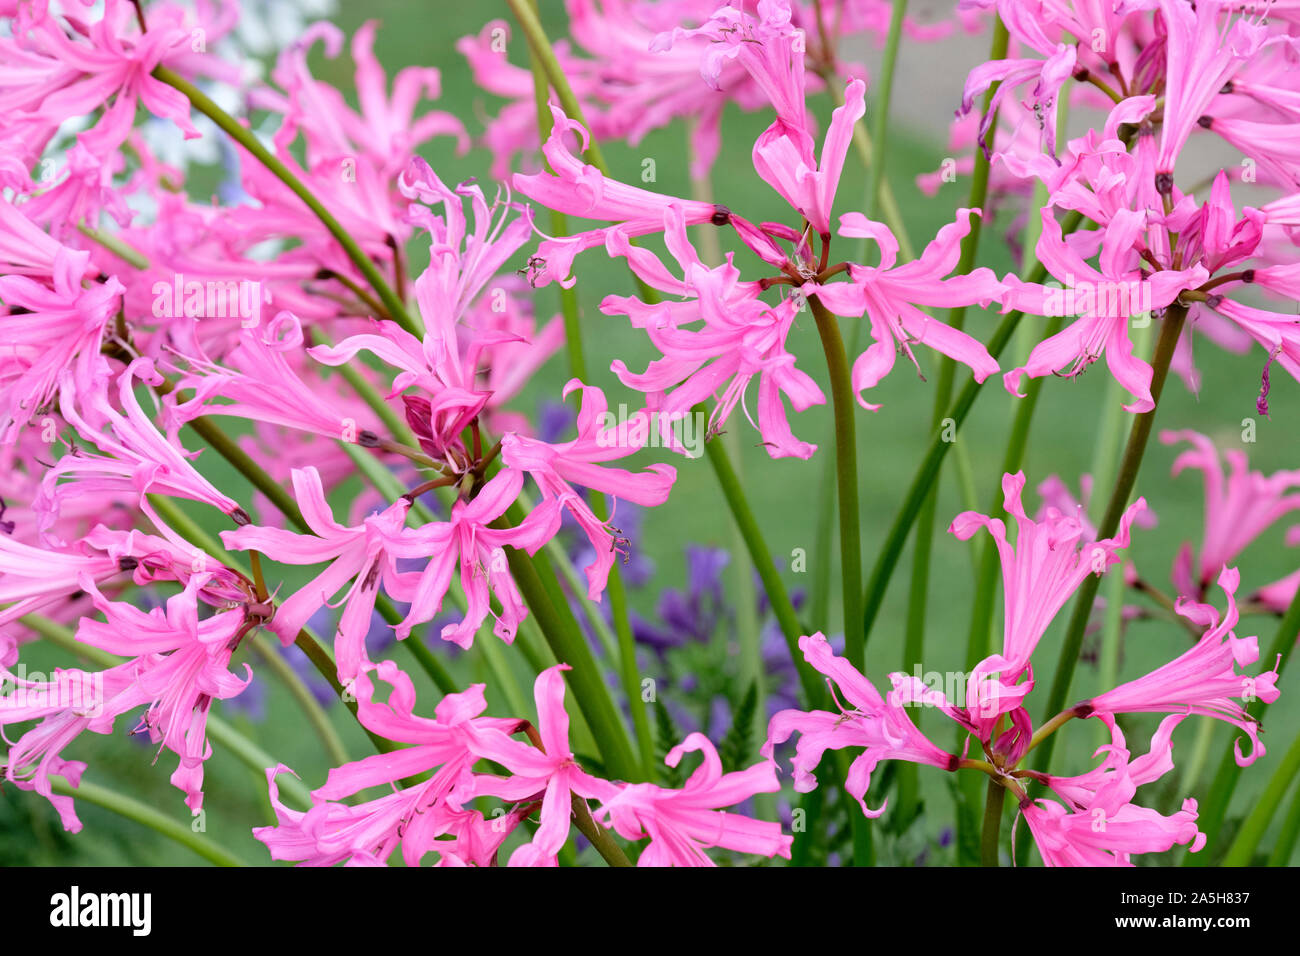 Clusters of pink lily-like flowers of ...